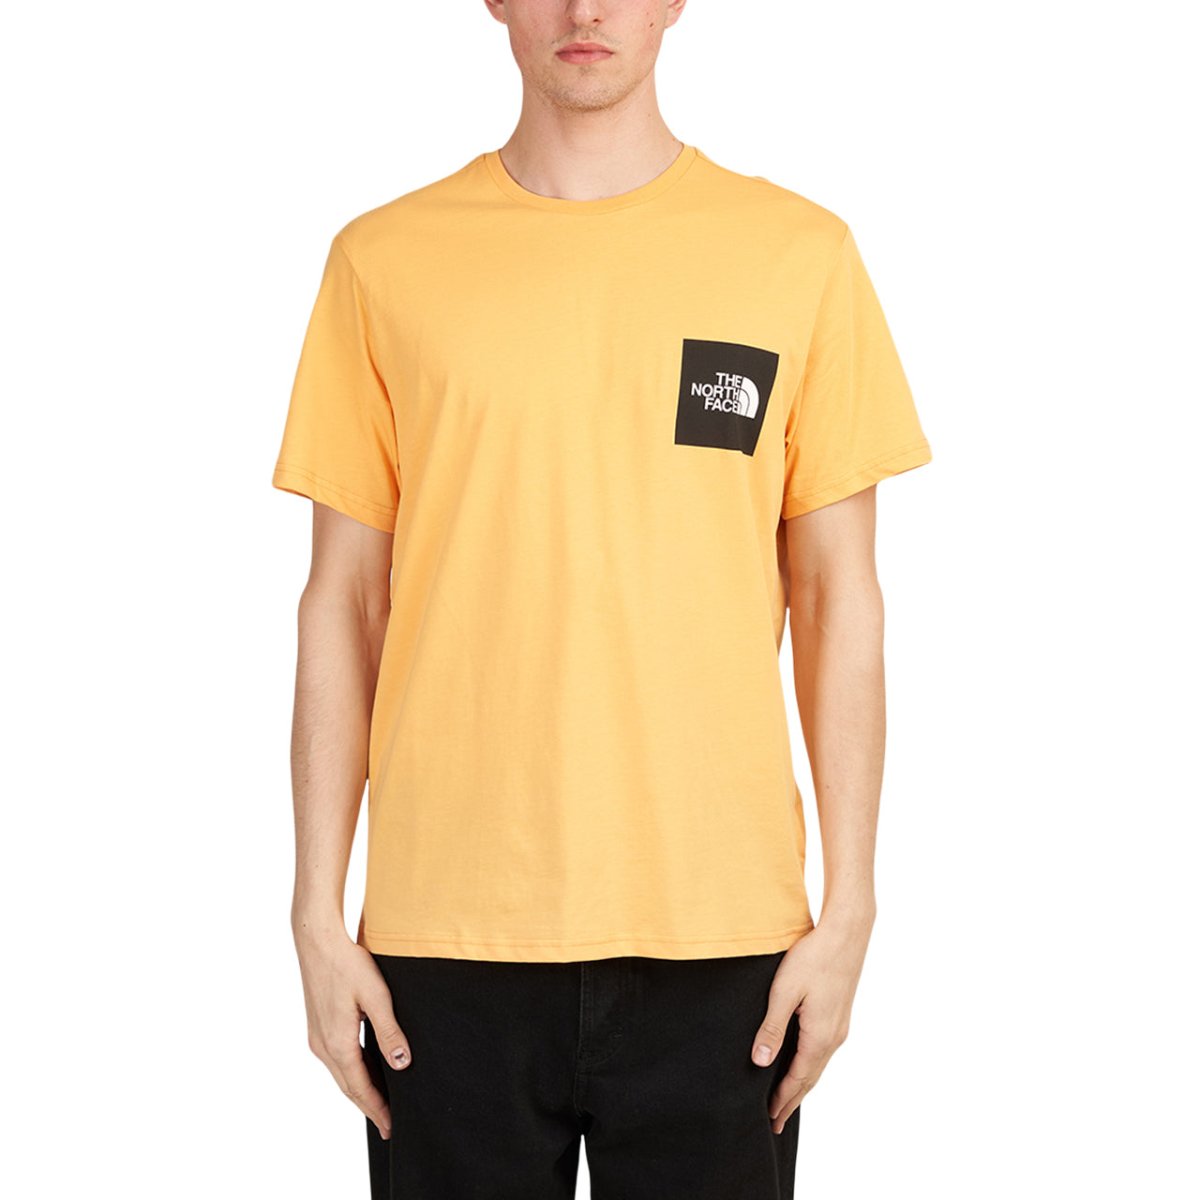 The North Face Galahm Graphic T-Shirt (Orange)  - Allike Store